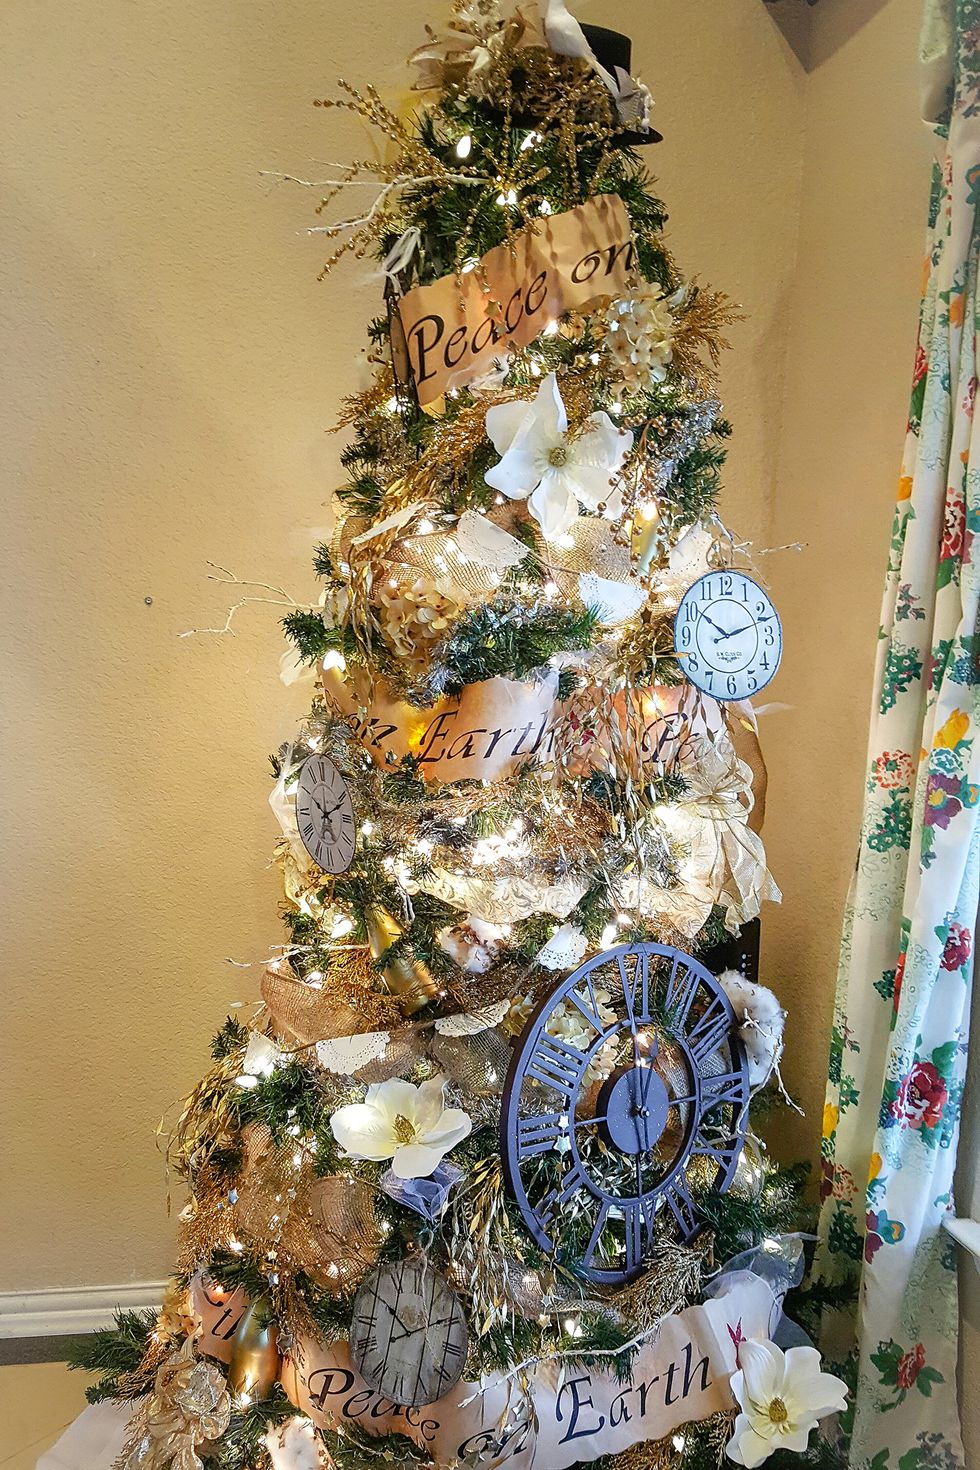 <p>This blogger removed some of the larger decorations&nbsp;from her tree and replaced those empty areas with antique and wooden clocks. </p><p><em data-redactor-tag="em"><a href="http://theperfectgathering.com/" target="_blank" data-tracking-id="recirc-text-link" data-href="http://theperfectgathering.com/">Get the tutorial from The Perfect Gathering »</a></em></p>